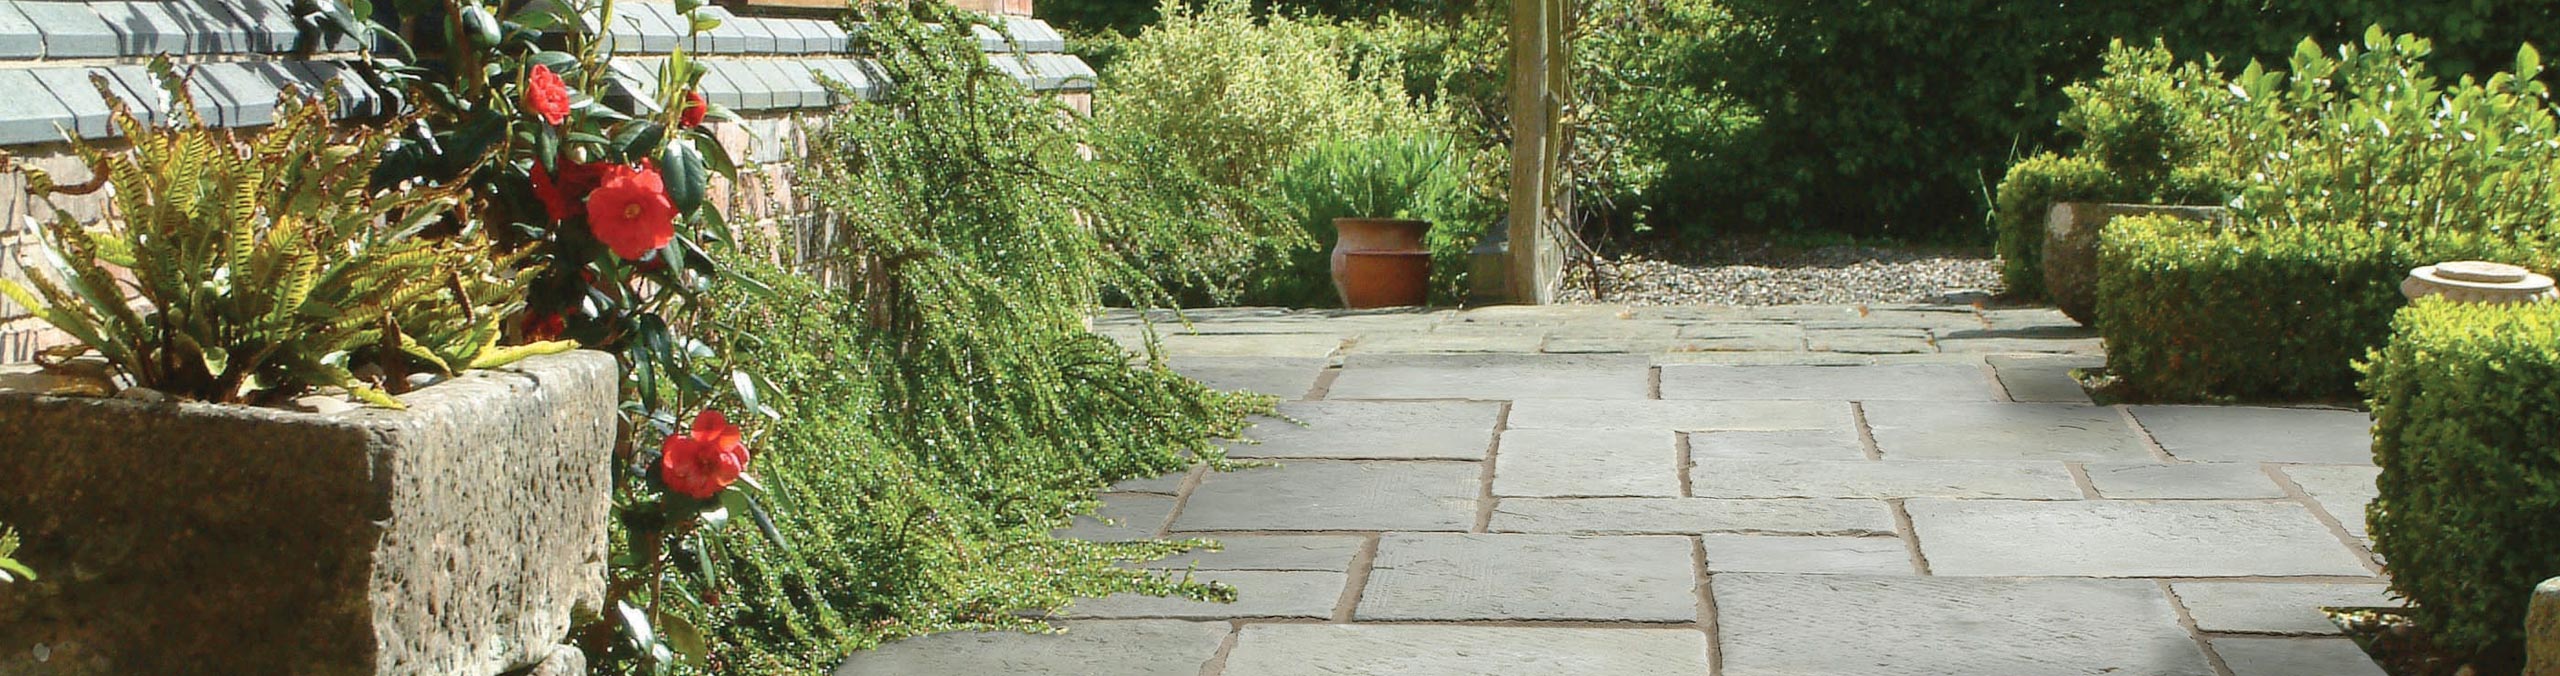 Over 400 Styles of Paving - the UK's biggest paving store